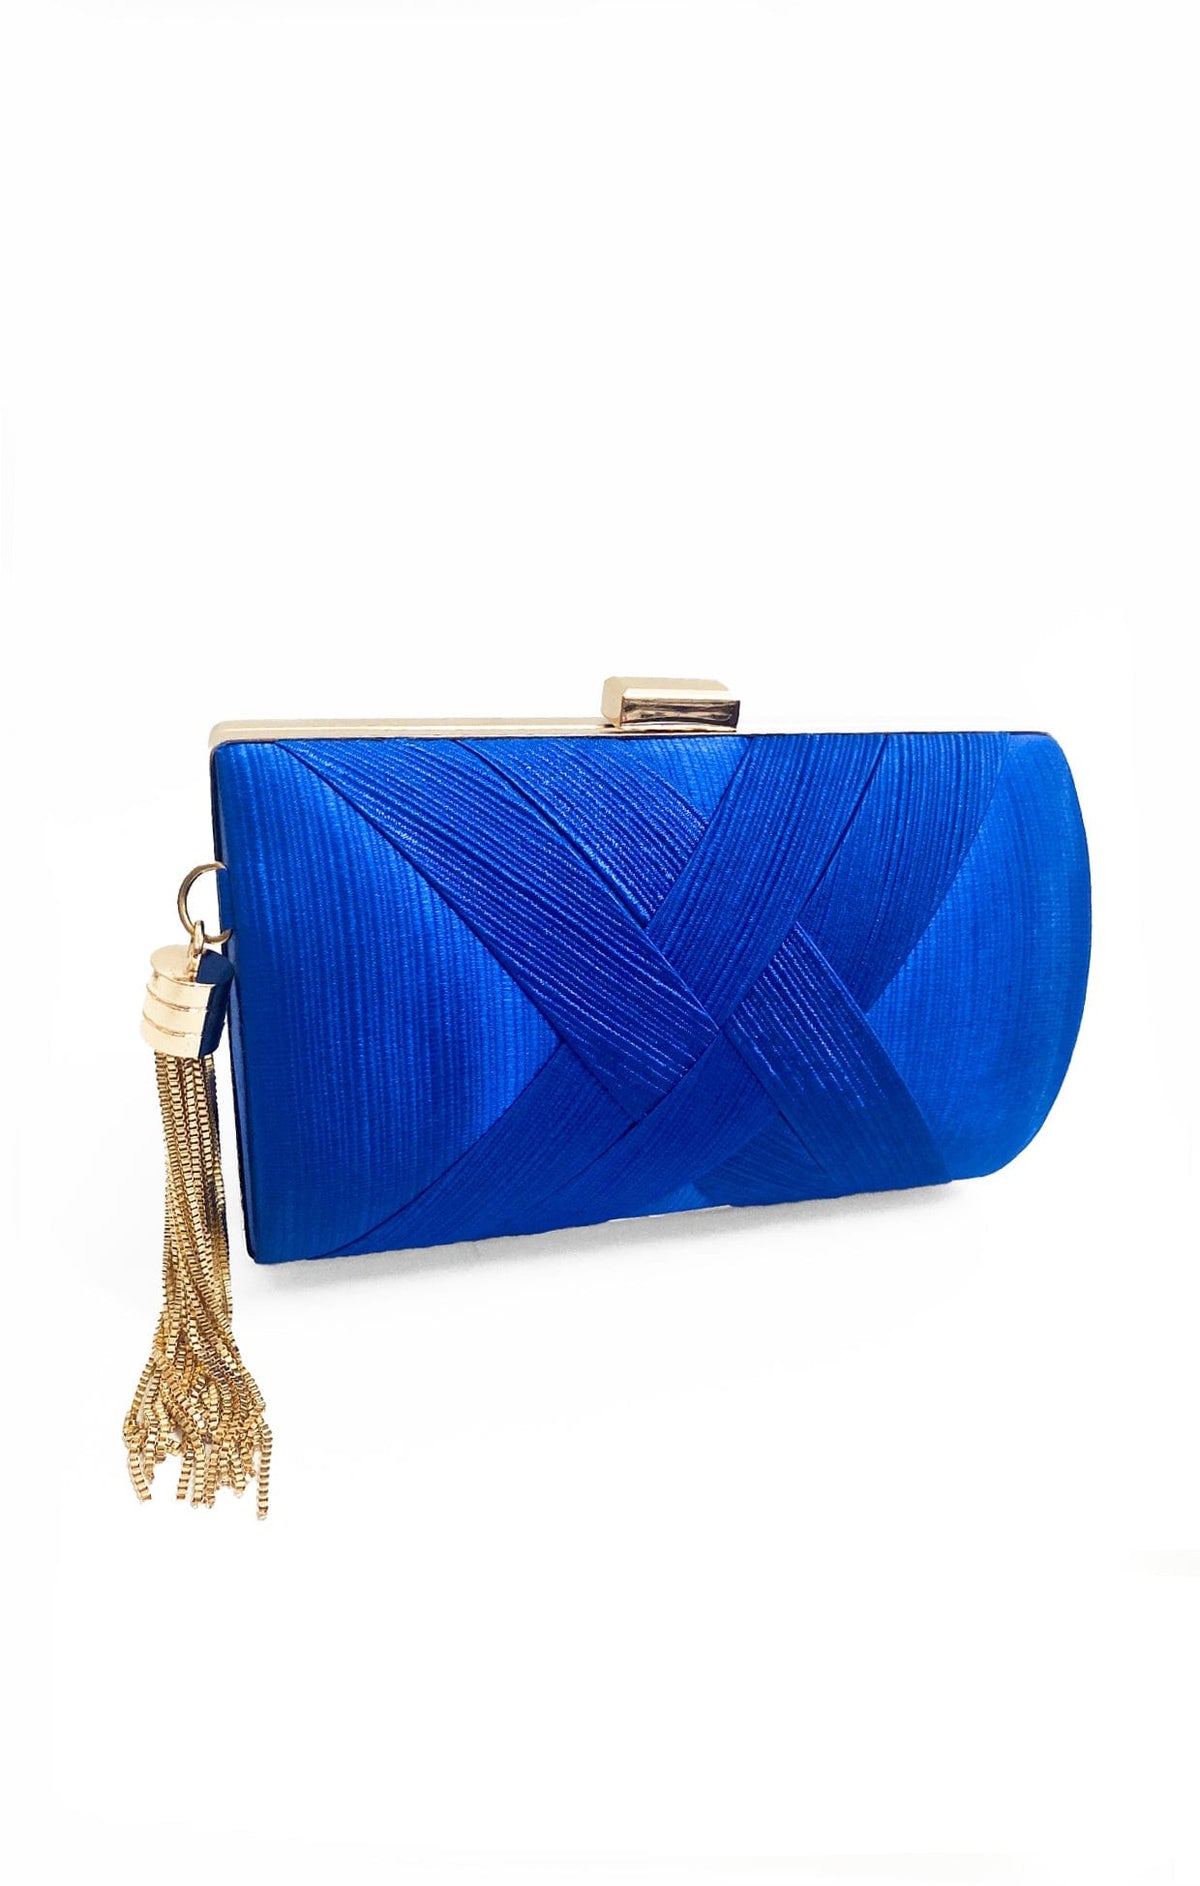 Evening Bags | ACCESSORIES Bags Clutches One Size / Blue DEANNA EVENING BAG IN BLUE